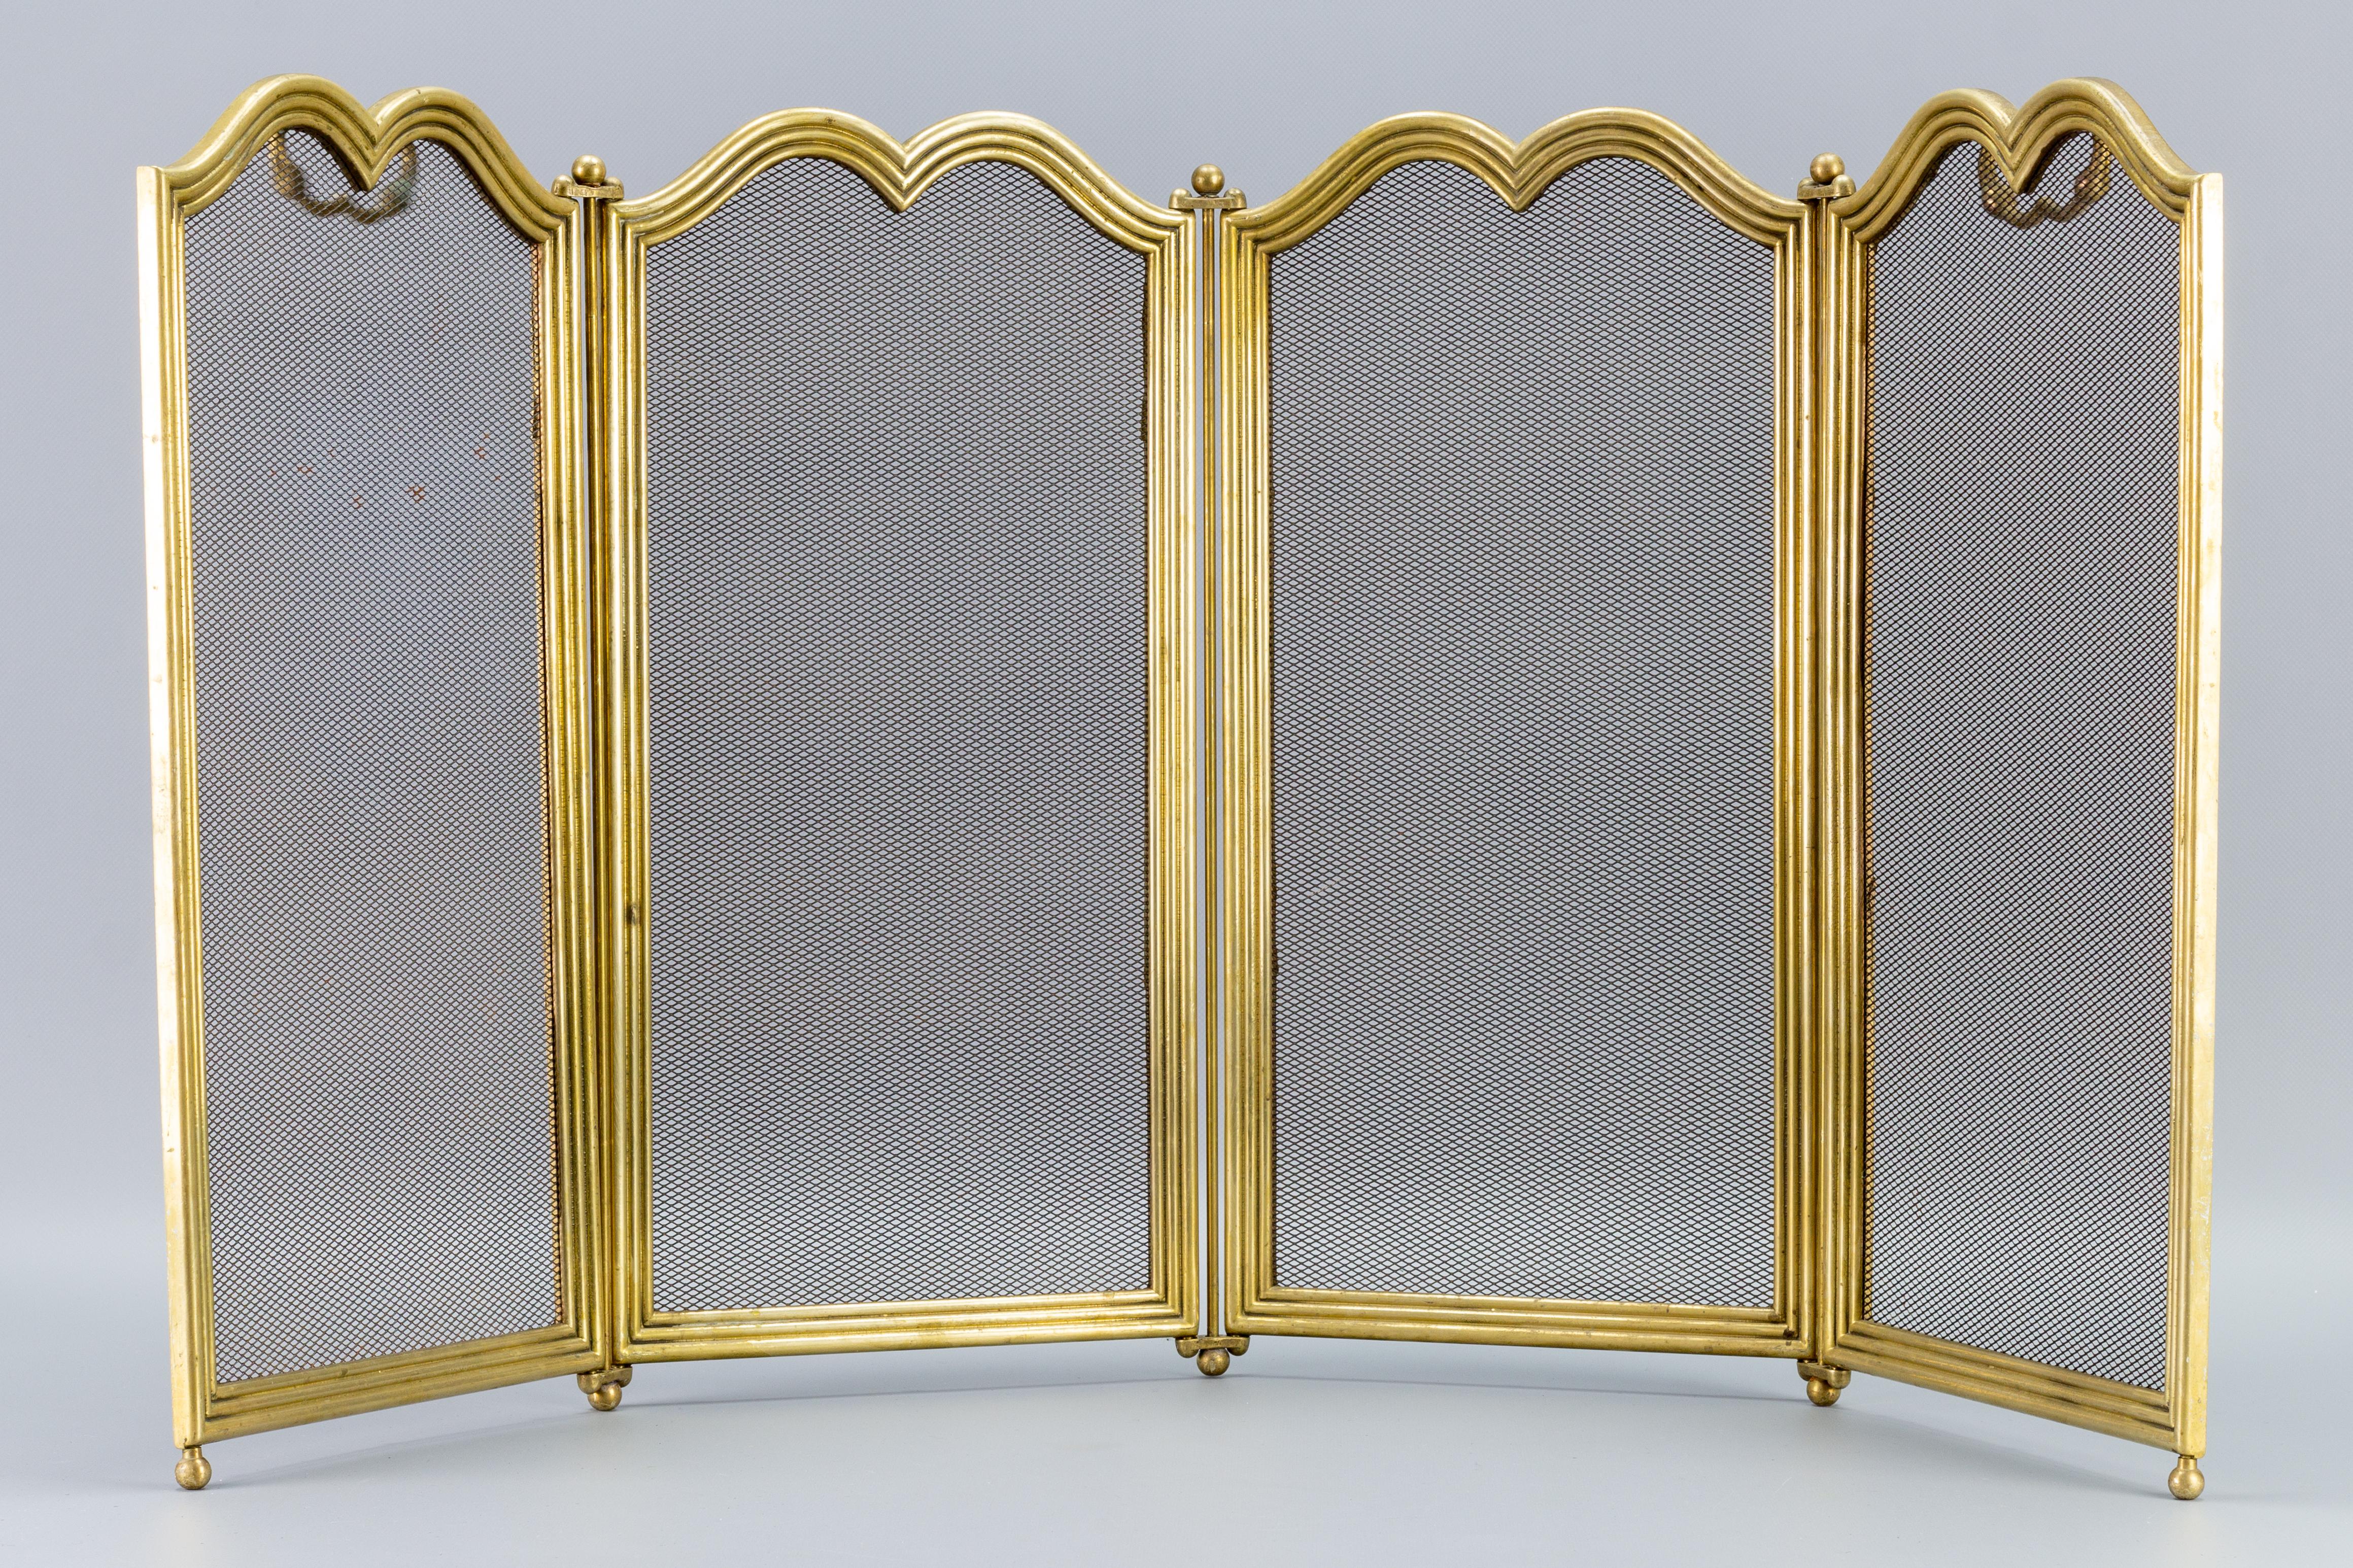 Adorable French brass and metal foldable fireplace screen with four hinged mesh sections. This beautifully shaped fire screen can be folded to adapt it around your heating appliance, France, 1950s.
Dimensions: Height: 51 cm / 20.07 in, total width: